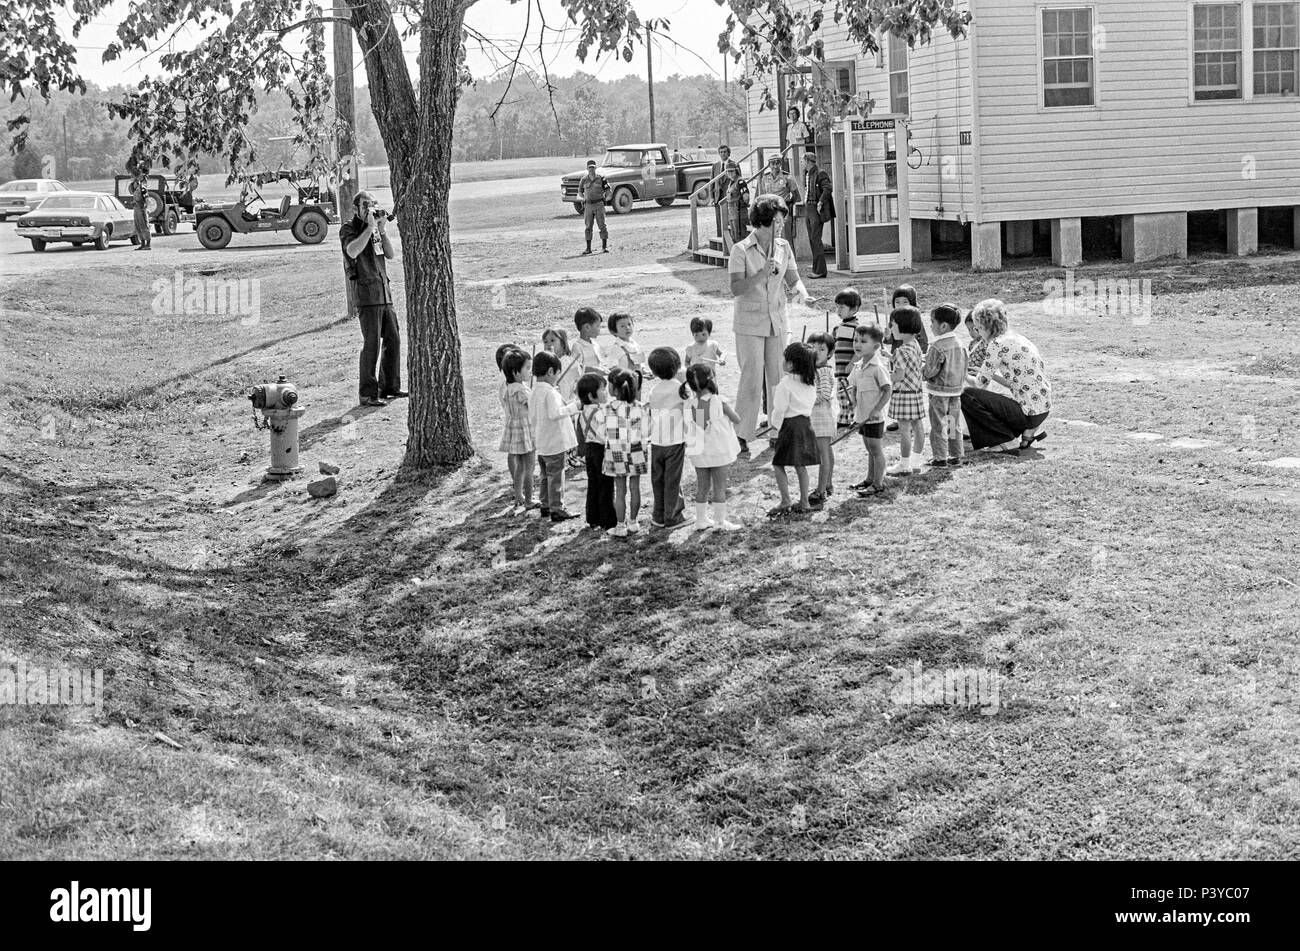 FORT SMITH, AR, USA - AUGUST 10, 1975 -- Teachers ready a class of very young Vietnamese refugee children to perform for President Gerald Ford.  The president is at the new Vietnamese refugee center at Fort Chaffee, AR to welcome the South Vietnamese refugees to the United States. Stock Photo